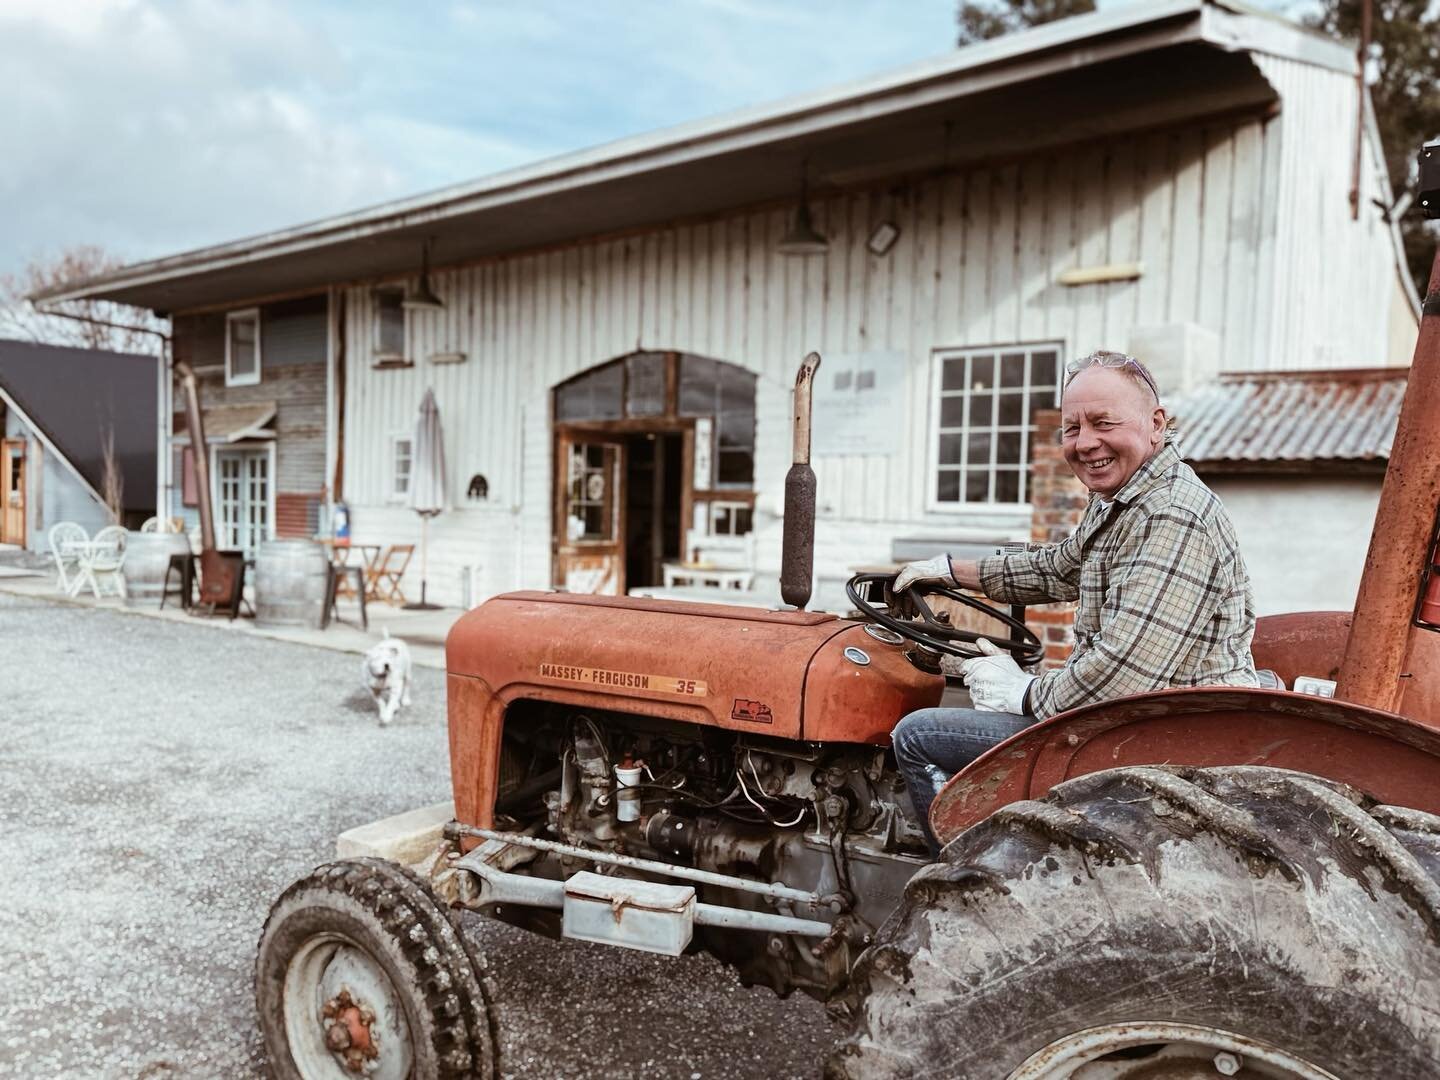 This is Doug. The friendly owner and winemaker at Swinging Gate vineyard in the Tamar Valley. Doug loves making wine and we love drinking it! Join us for a relaxed tasting of his creative wines at this rustic cellar door.